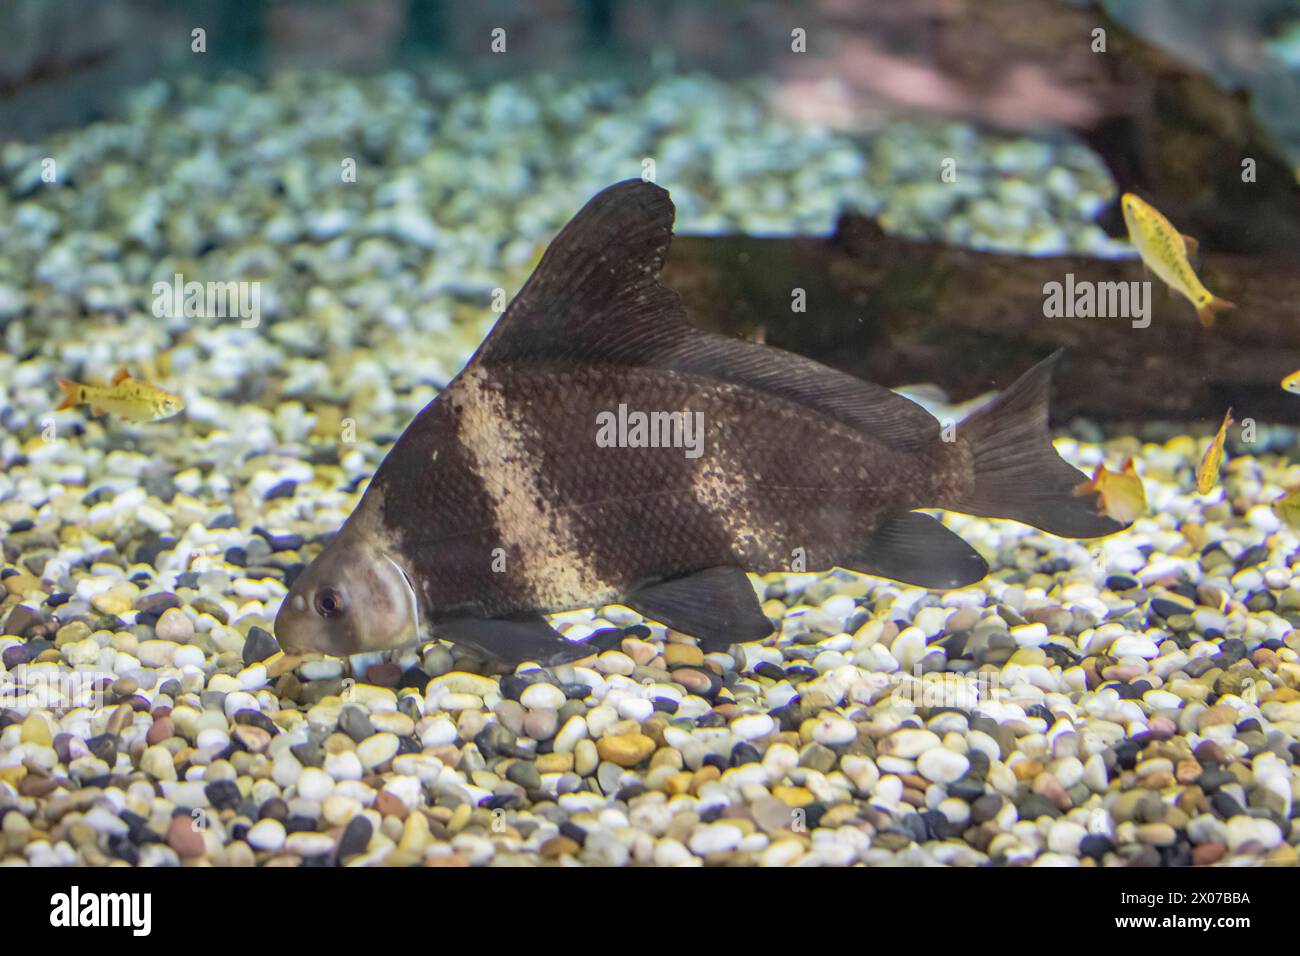 The Chinese high-fin banded shark (Myxocyprinus asiaticus) is a popular freshwater aquarium fish.  It has declined drastically due to pollution, dams, Stock Photo